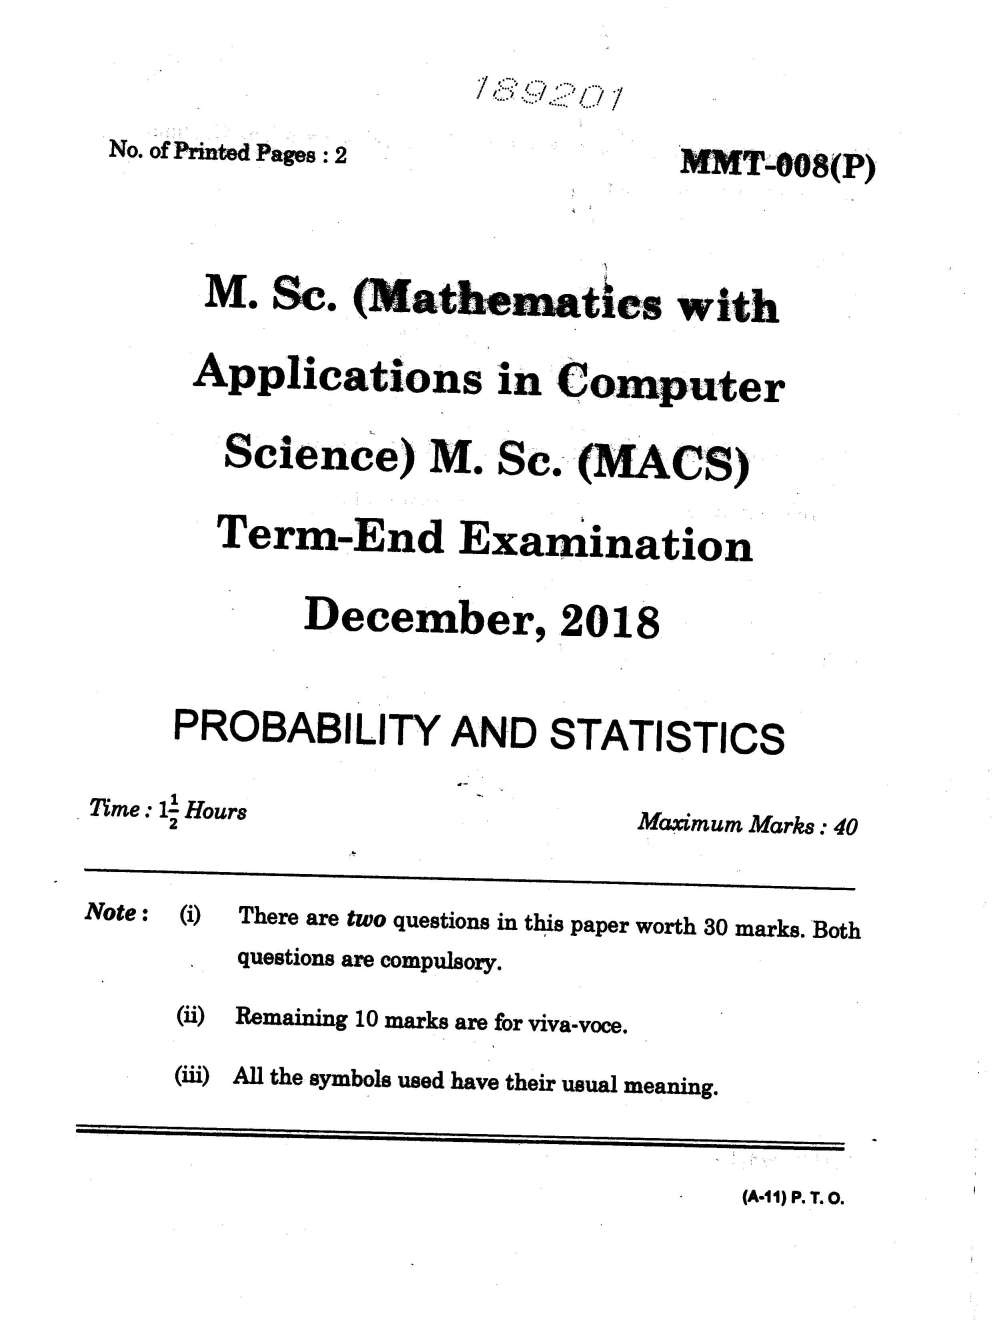 research and statistics question paper pdf